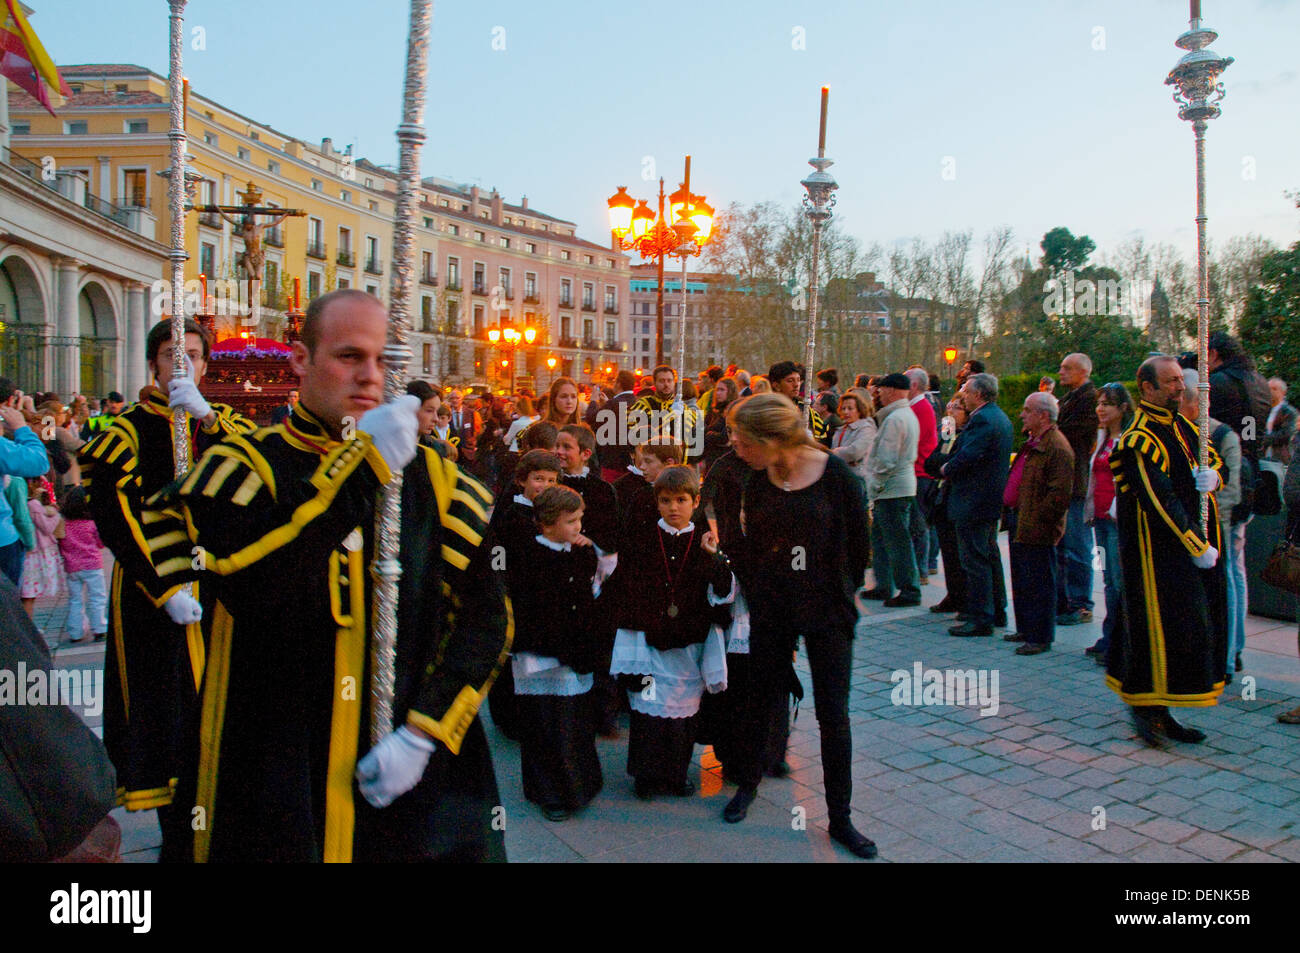 Holy Week procession. Oriente Square, Madrid, Spain. Stock Photo